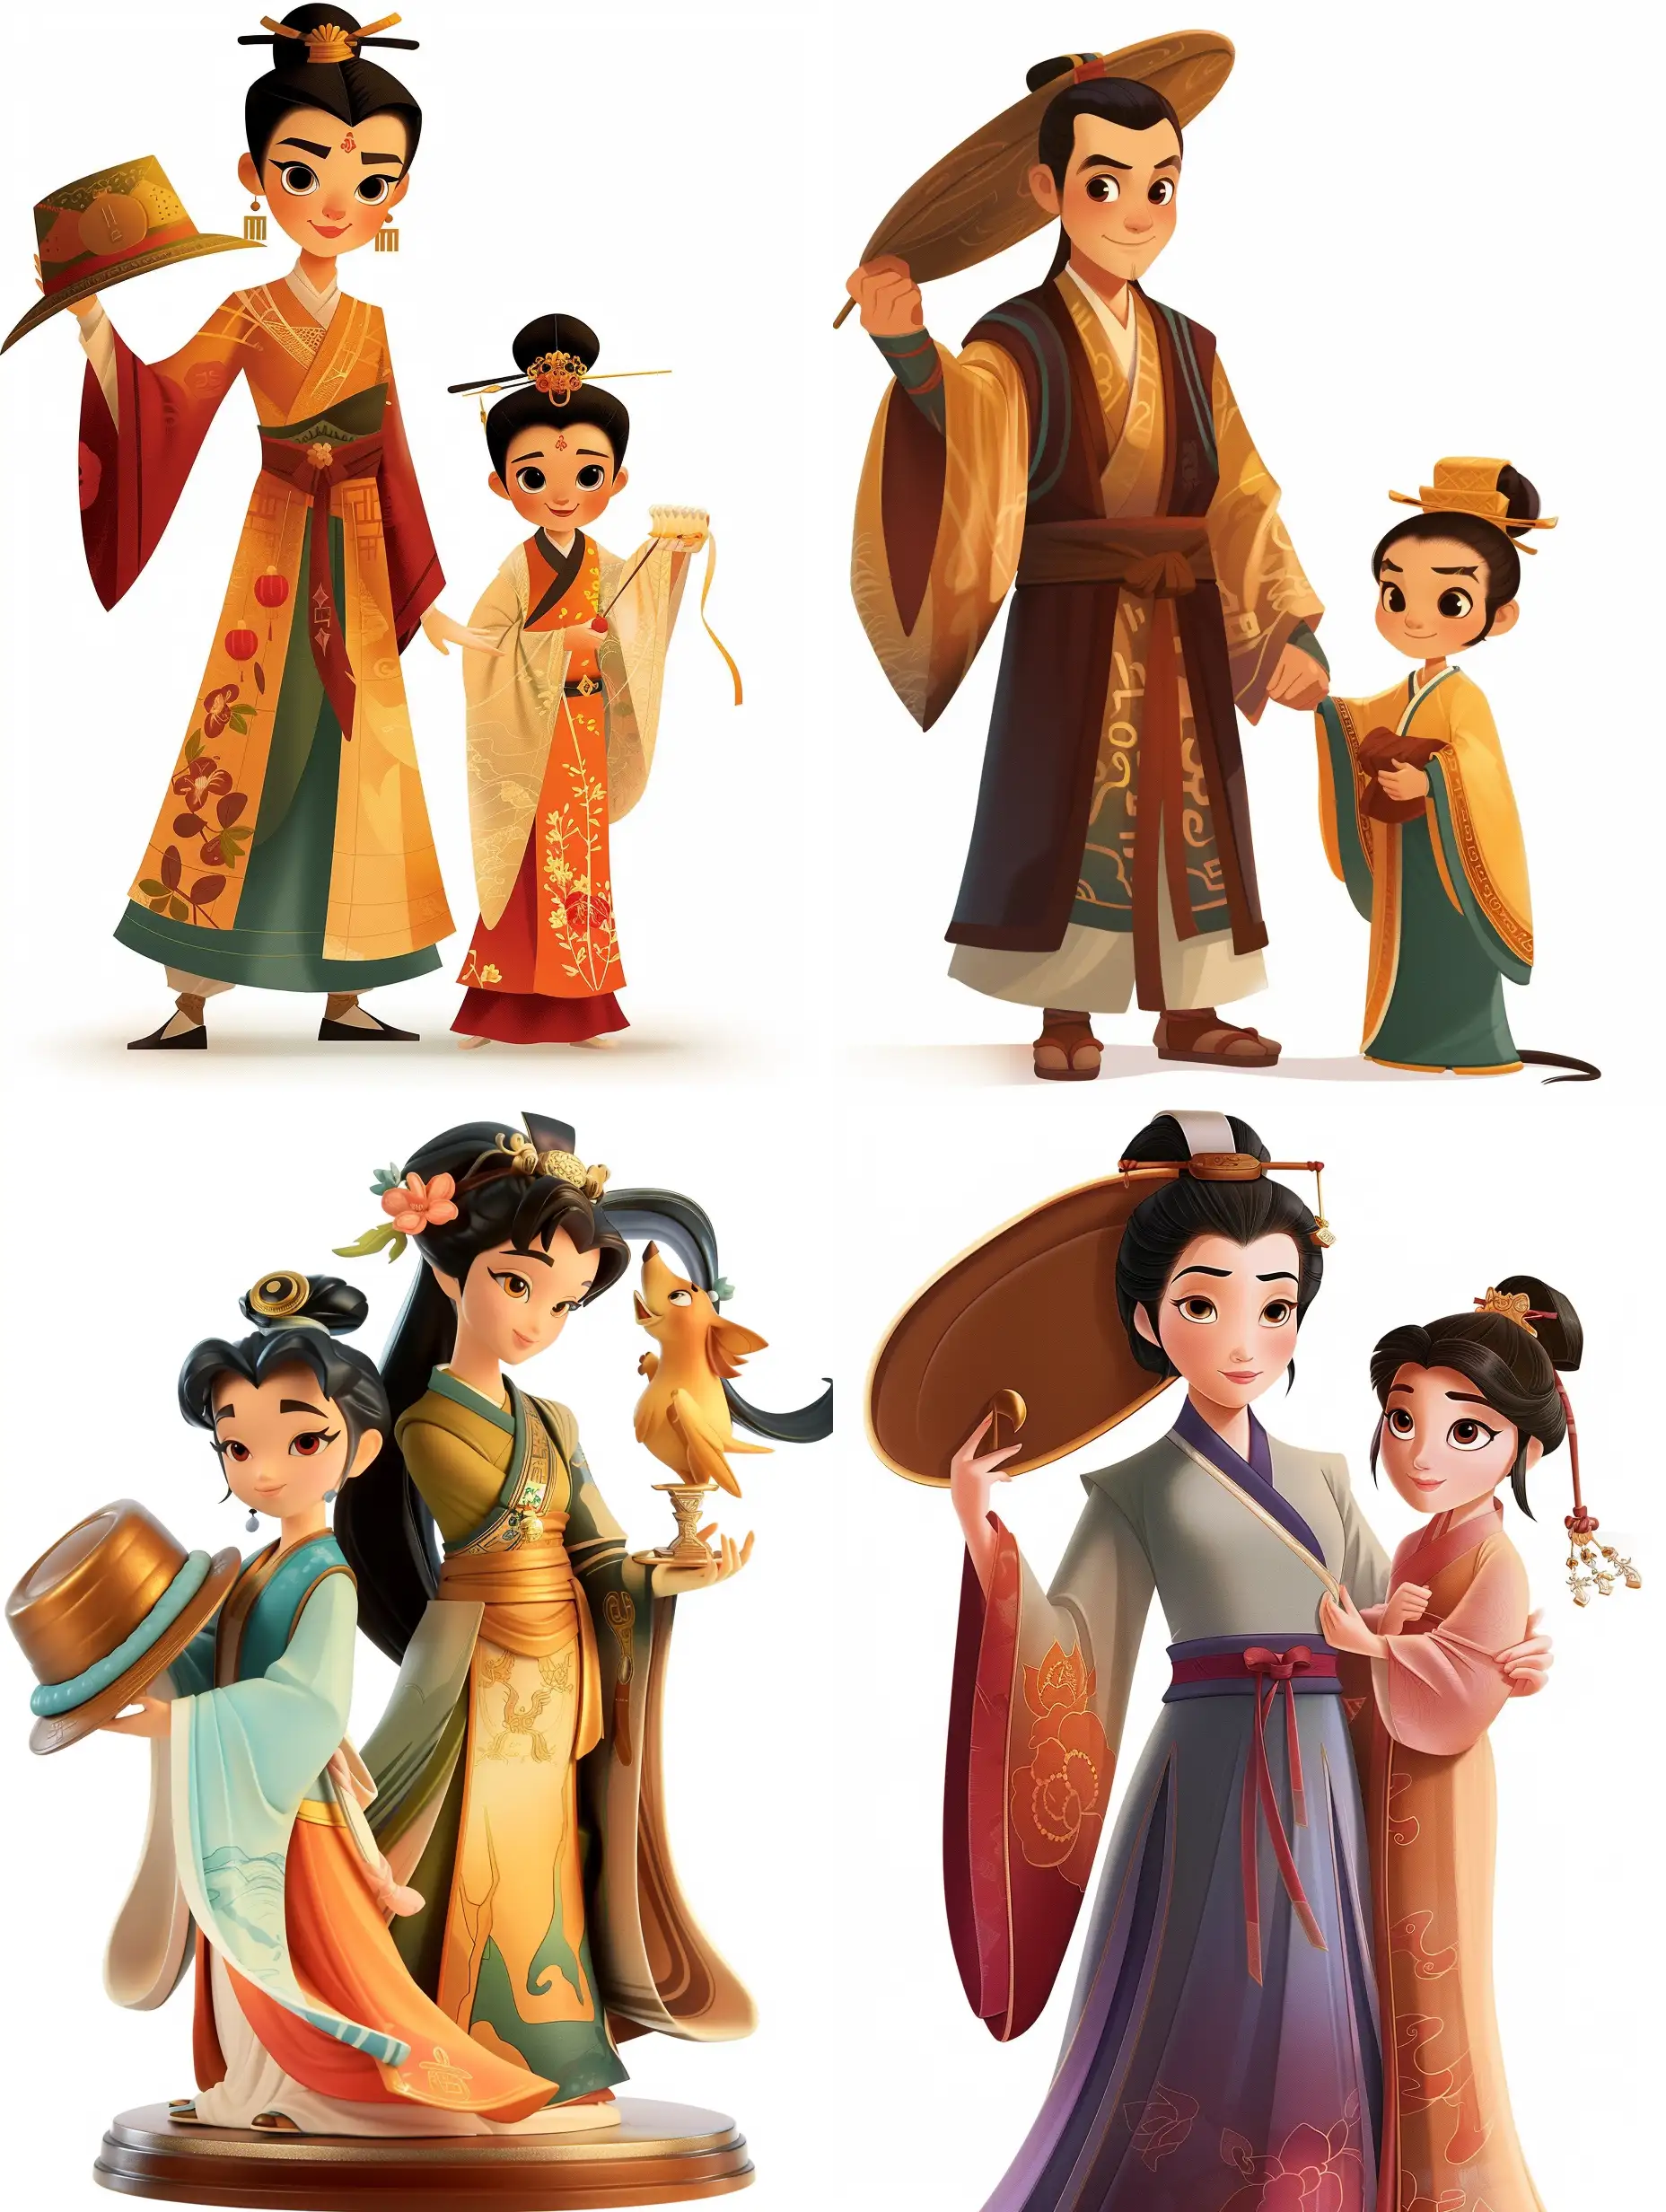 Imperial-Examination-Deity-with-Champion-Hat-and-Yu-Ruyi-Brilliant-Disney-Movie-Character-in-Rich-Detail